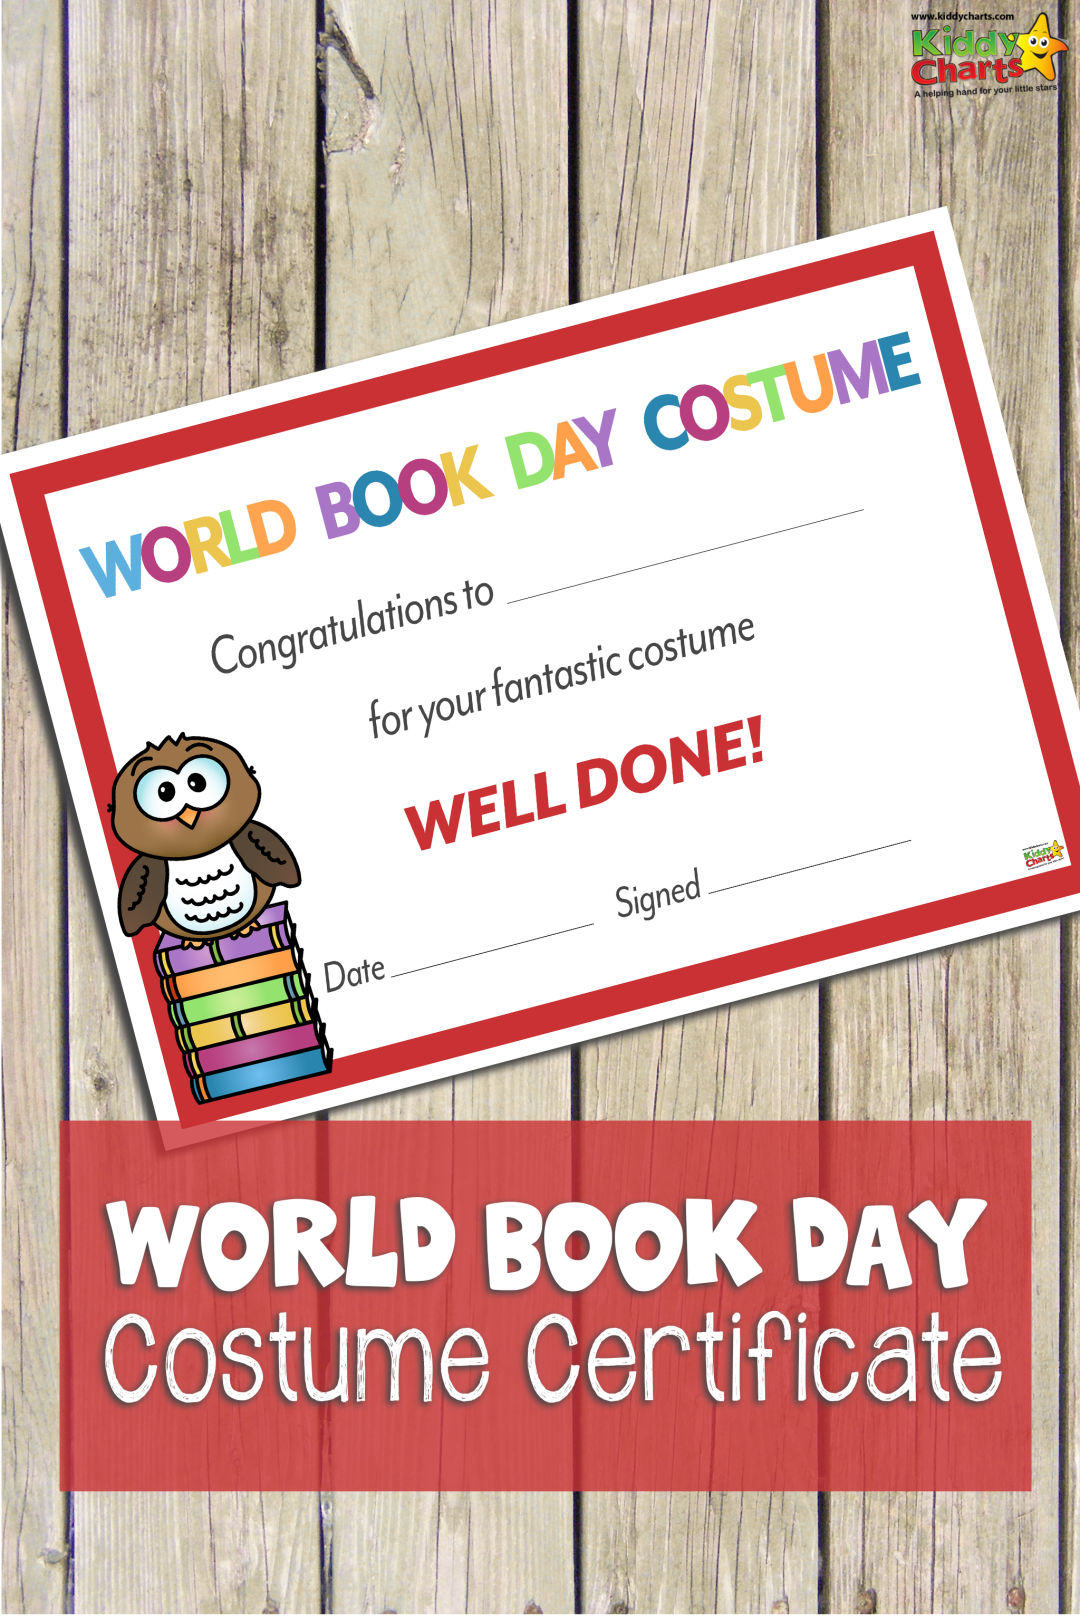 World Book Day Certificate: Best Costume - Best Costume Certificate Printable Free